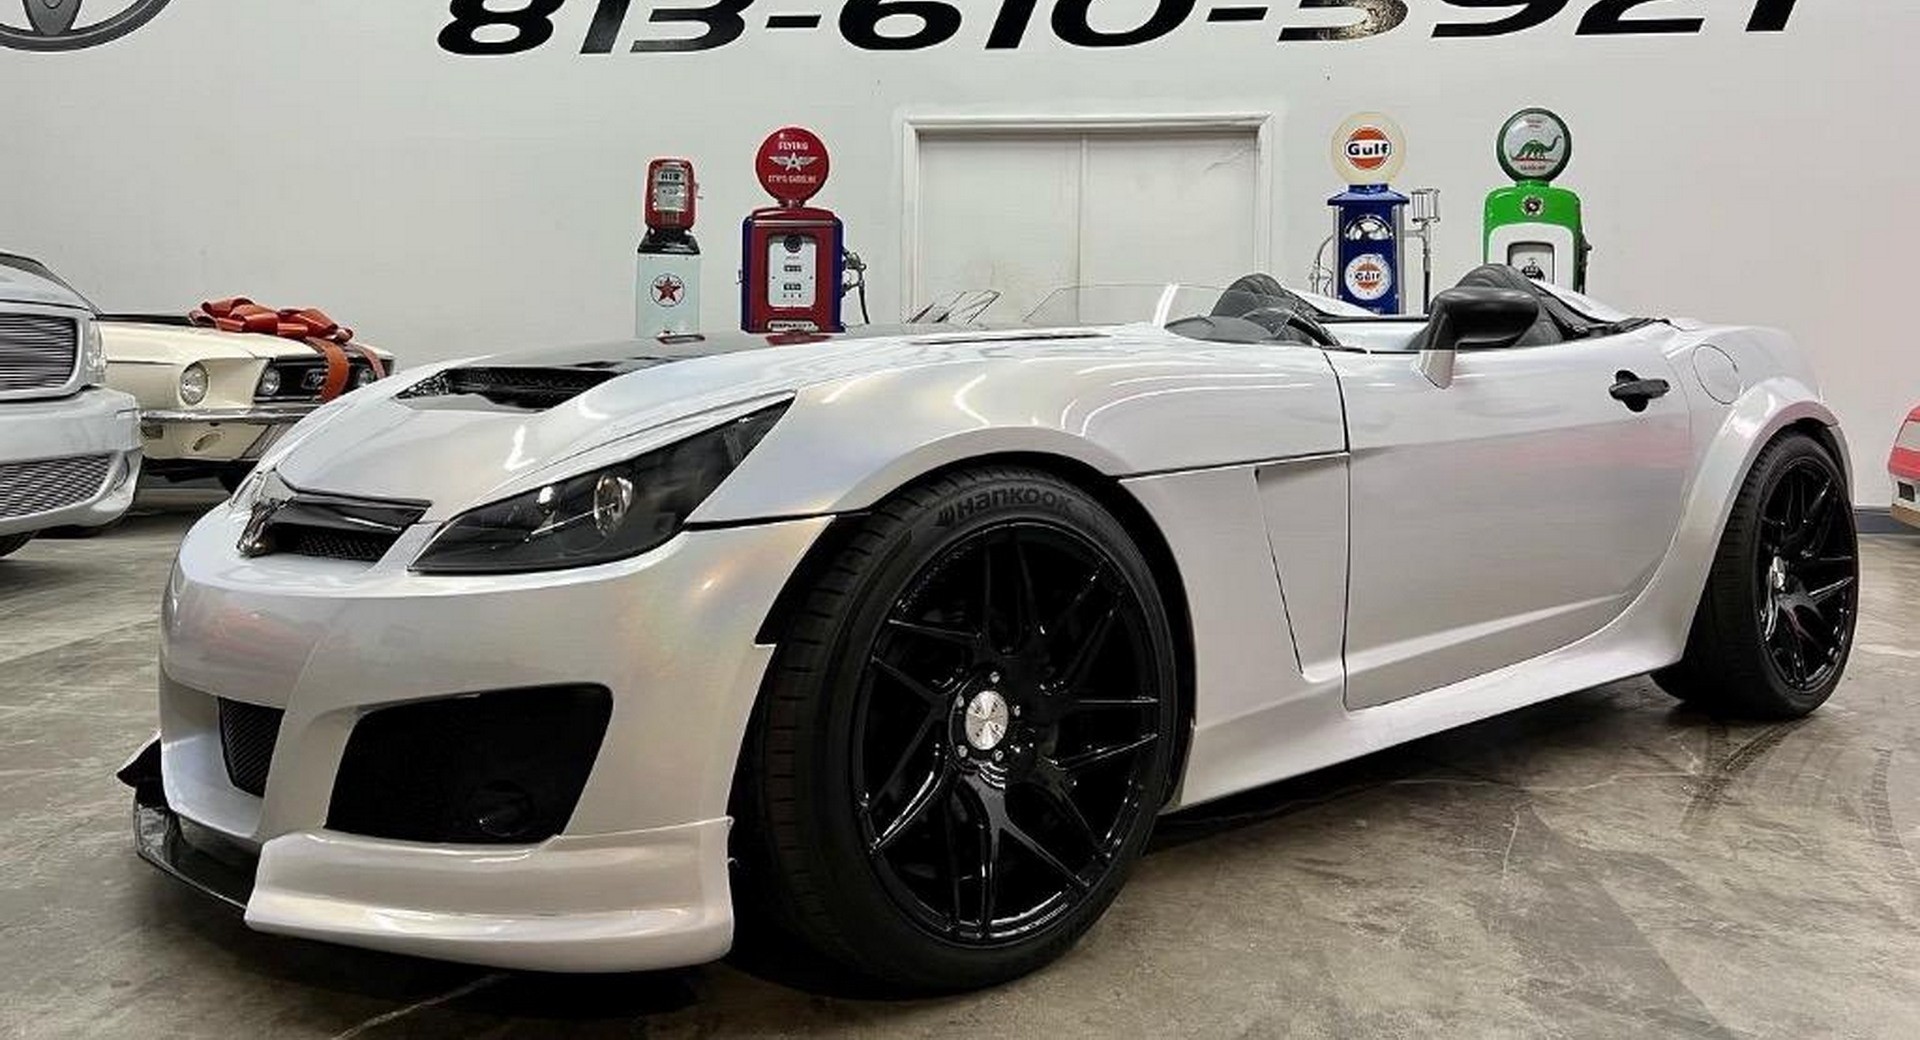 Vermomd Trappenhuis Eerbetoon Custom Saturn Sky With A Corvette Surprise Looks Fun In All The Right Ways  | Carscoops